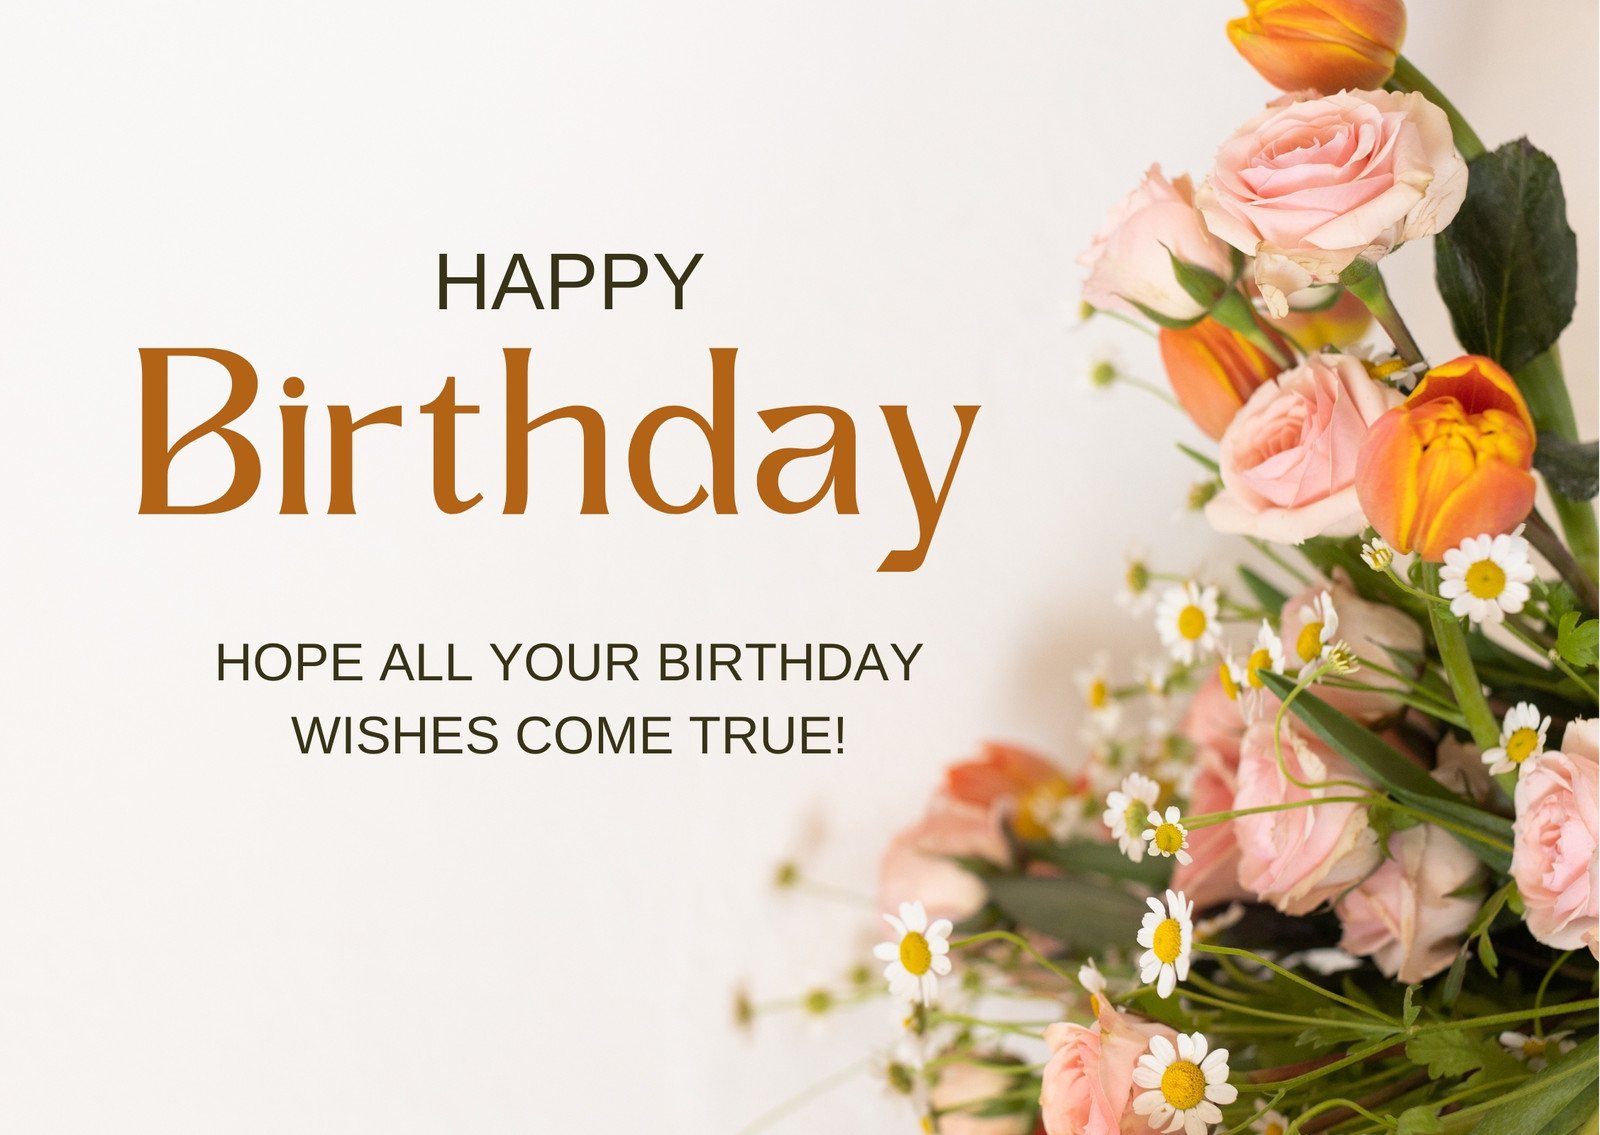 Incredible Collection of Full 4K Birthday Greetings Images – Over 999+ Amazing Options